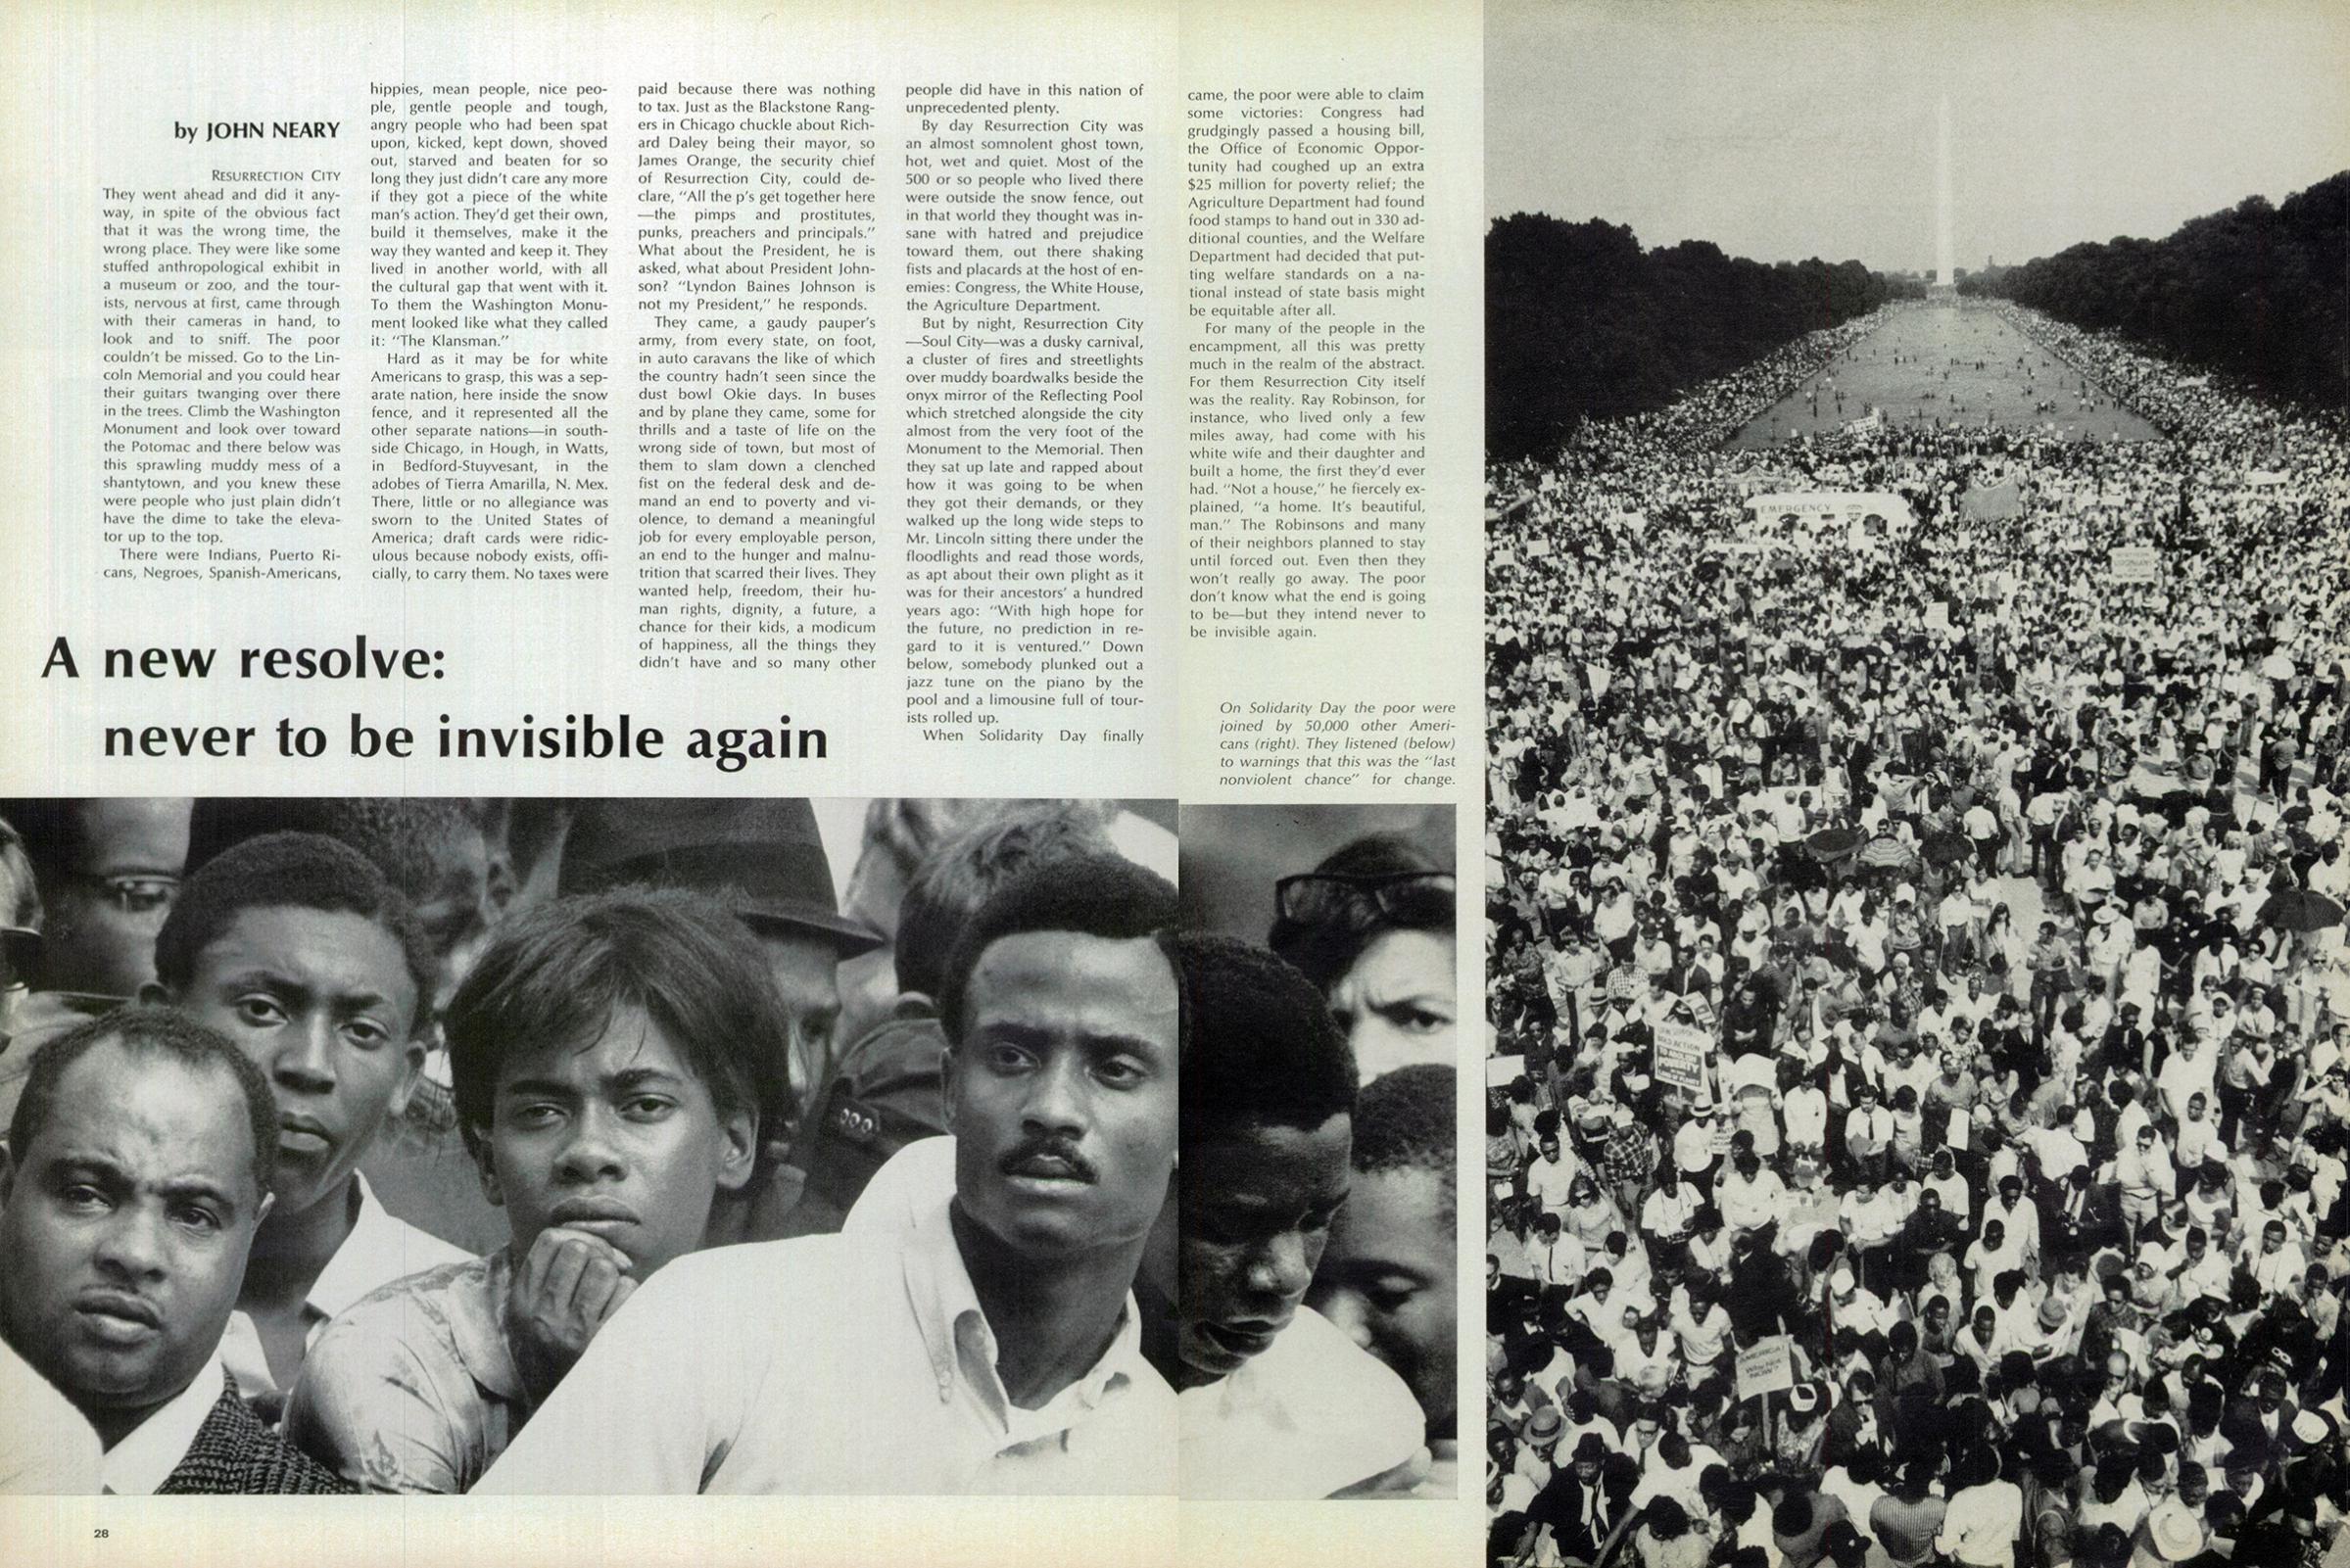 Ressurection City photo essay from LIFE magazine, June 28, 1968.